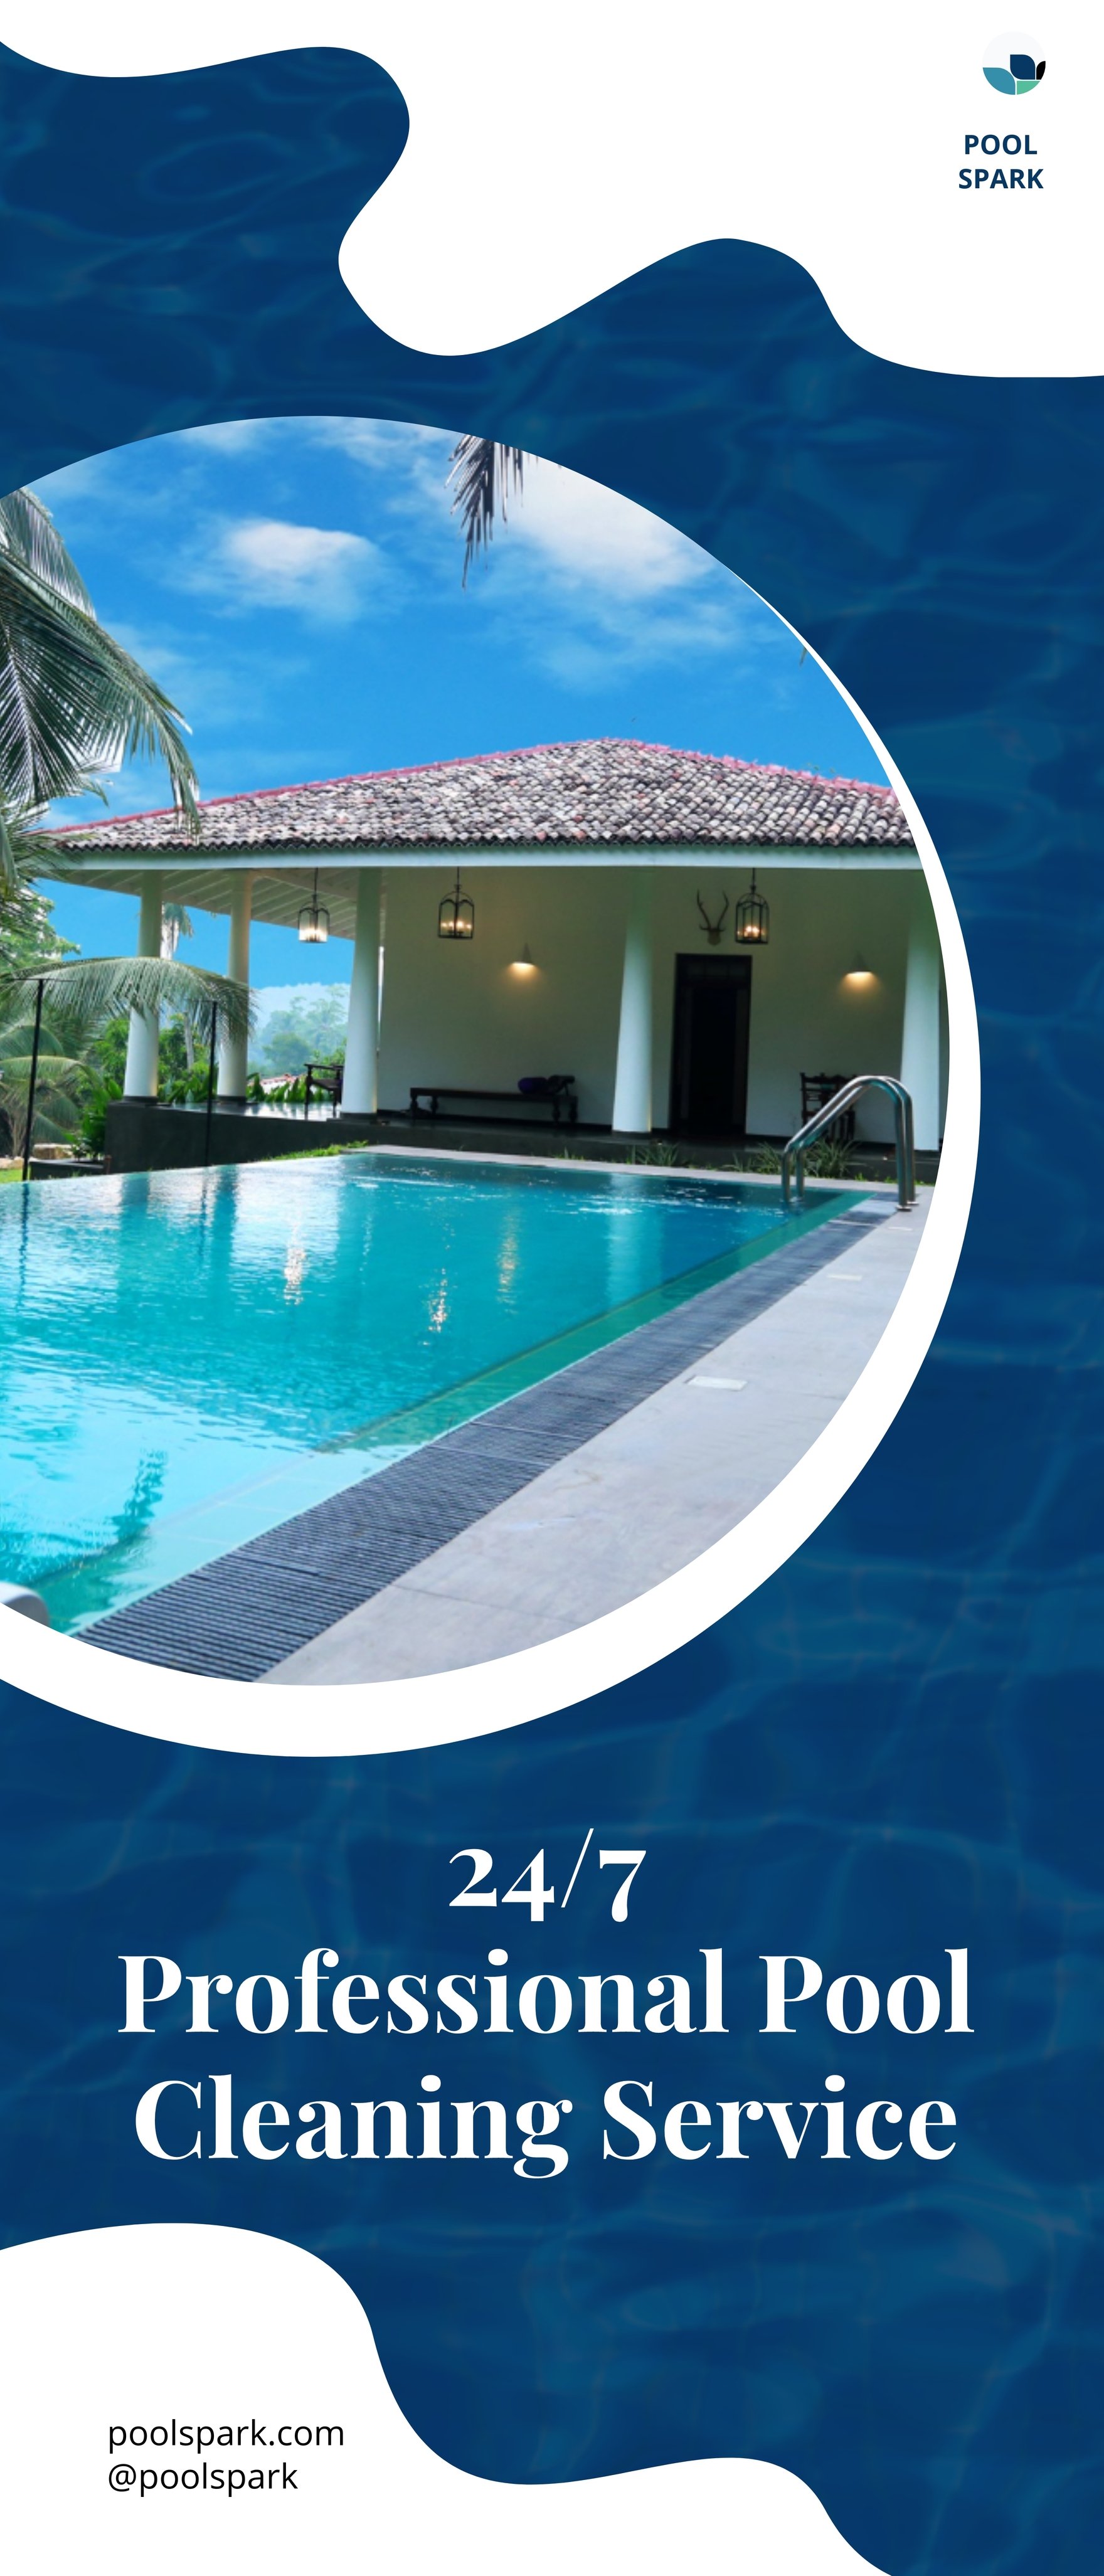 Swimming Pool Cleaning Service Roll Up Banner Template